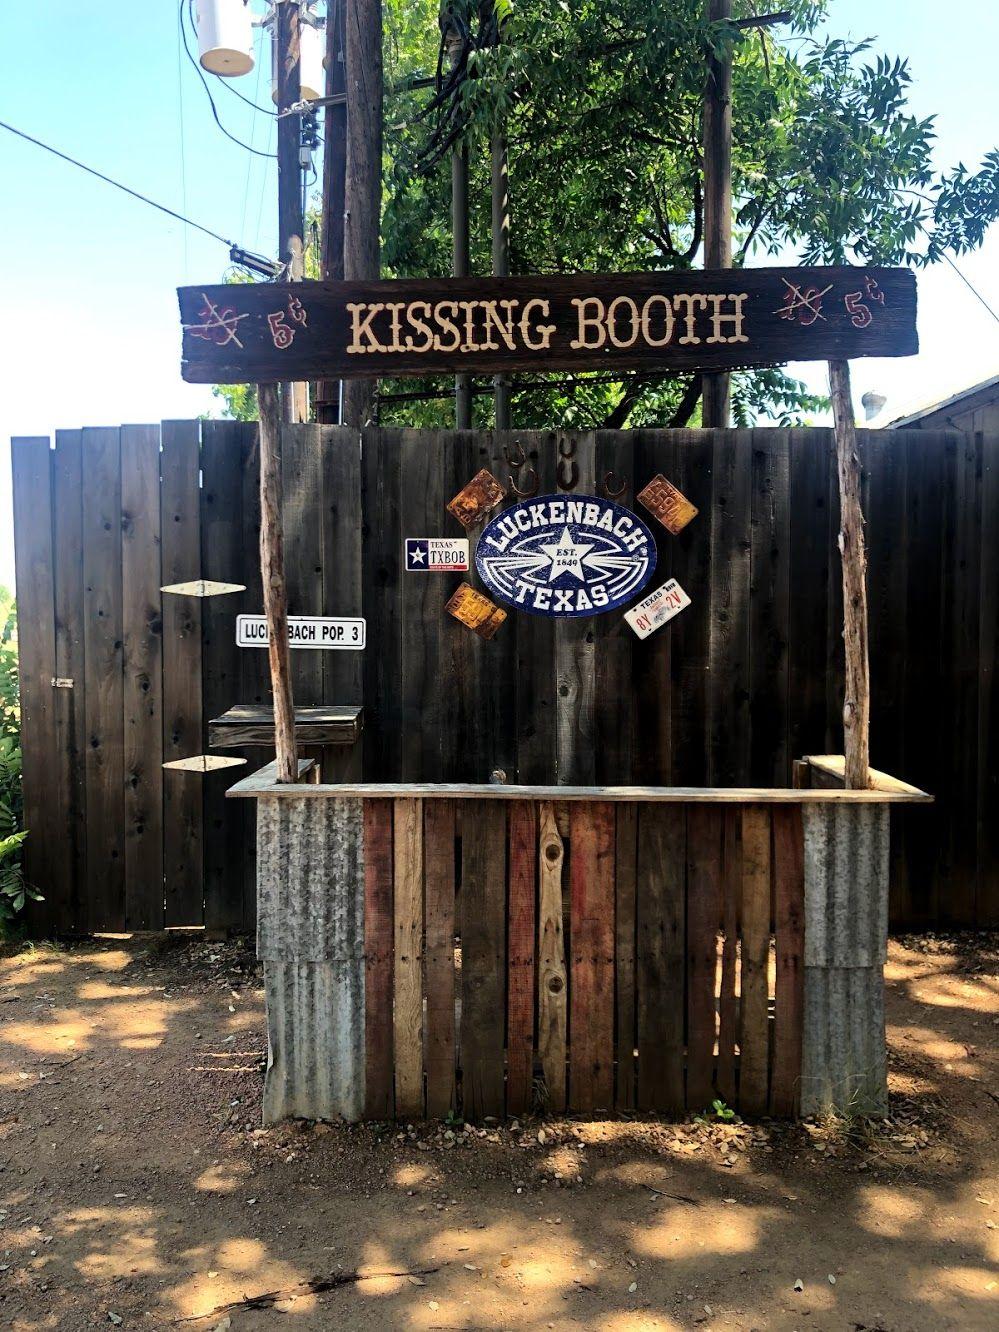 A wooden kissing booth with a Luckenbach sign on a fence behind it.